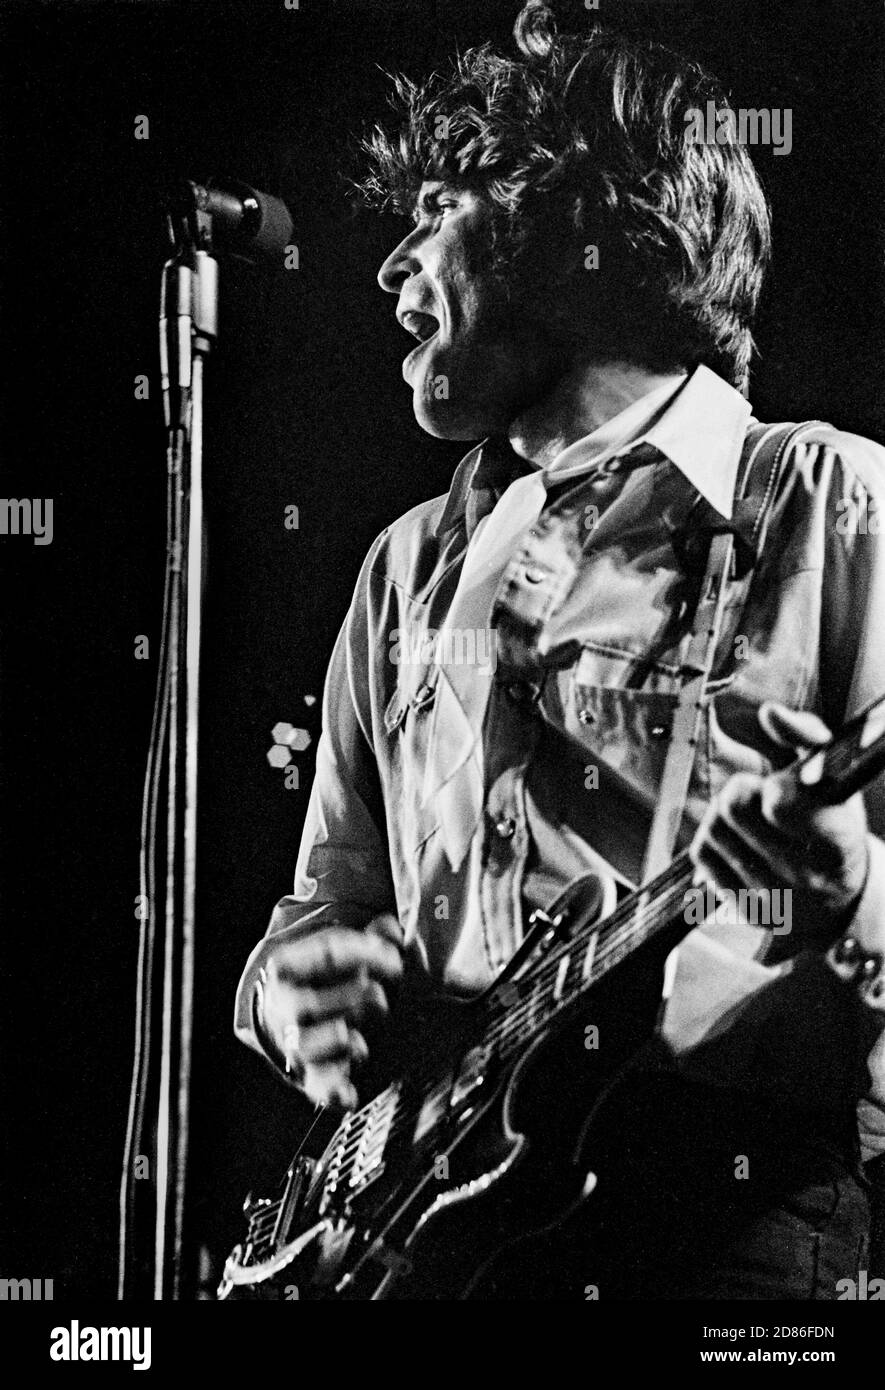 ROTTERDAM, NETHERLANDS: John Fogerty of Creedence Clearwater Revival performs live in Rotterdam, Holland in April 1970. (Photo by Gijsbert Hanekroot) Stock Photo